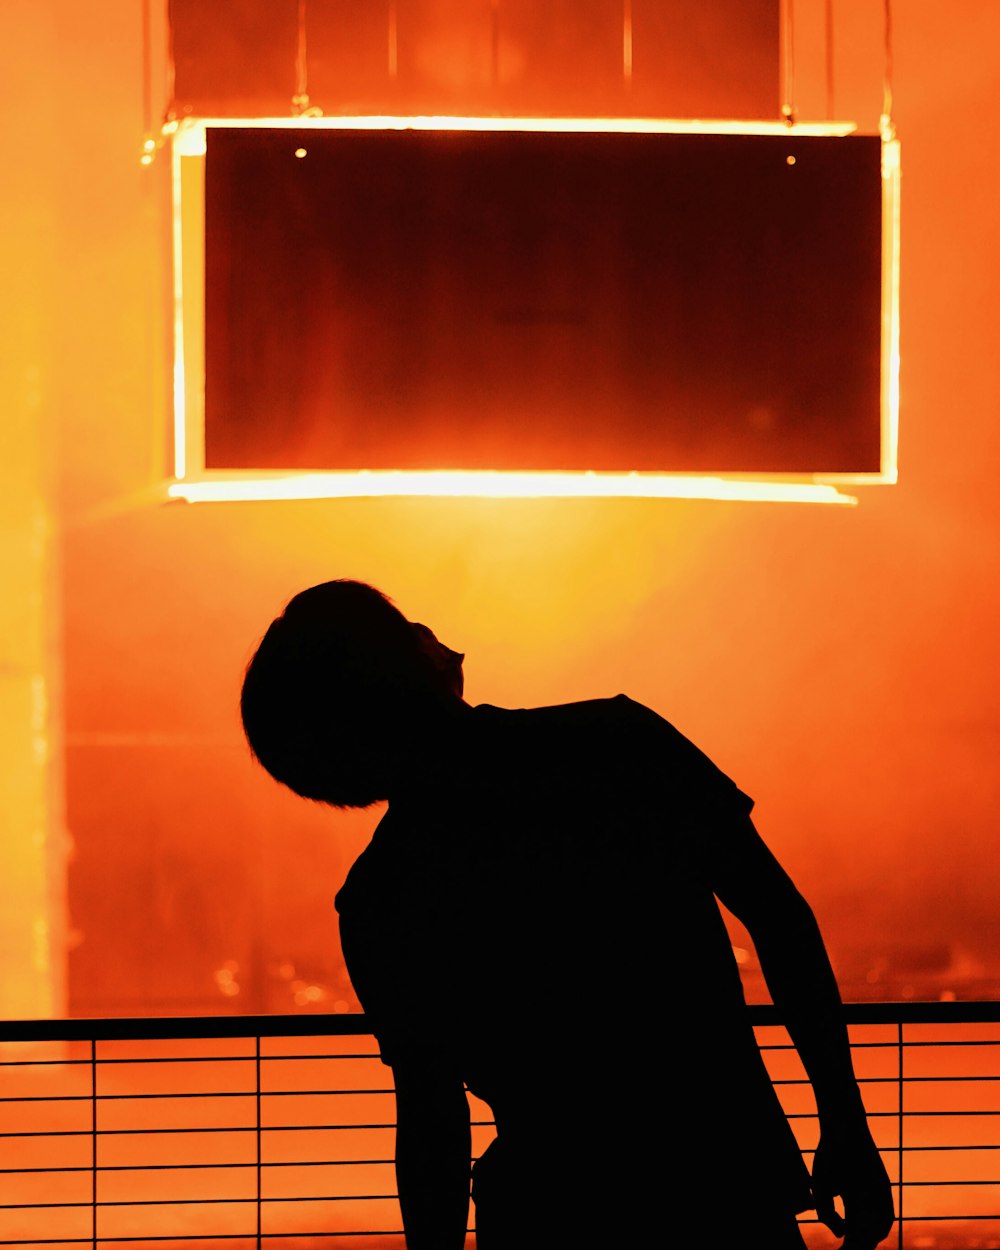 a silhouette of a person standing in front of a building